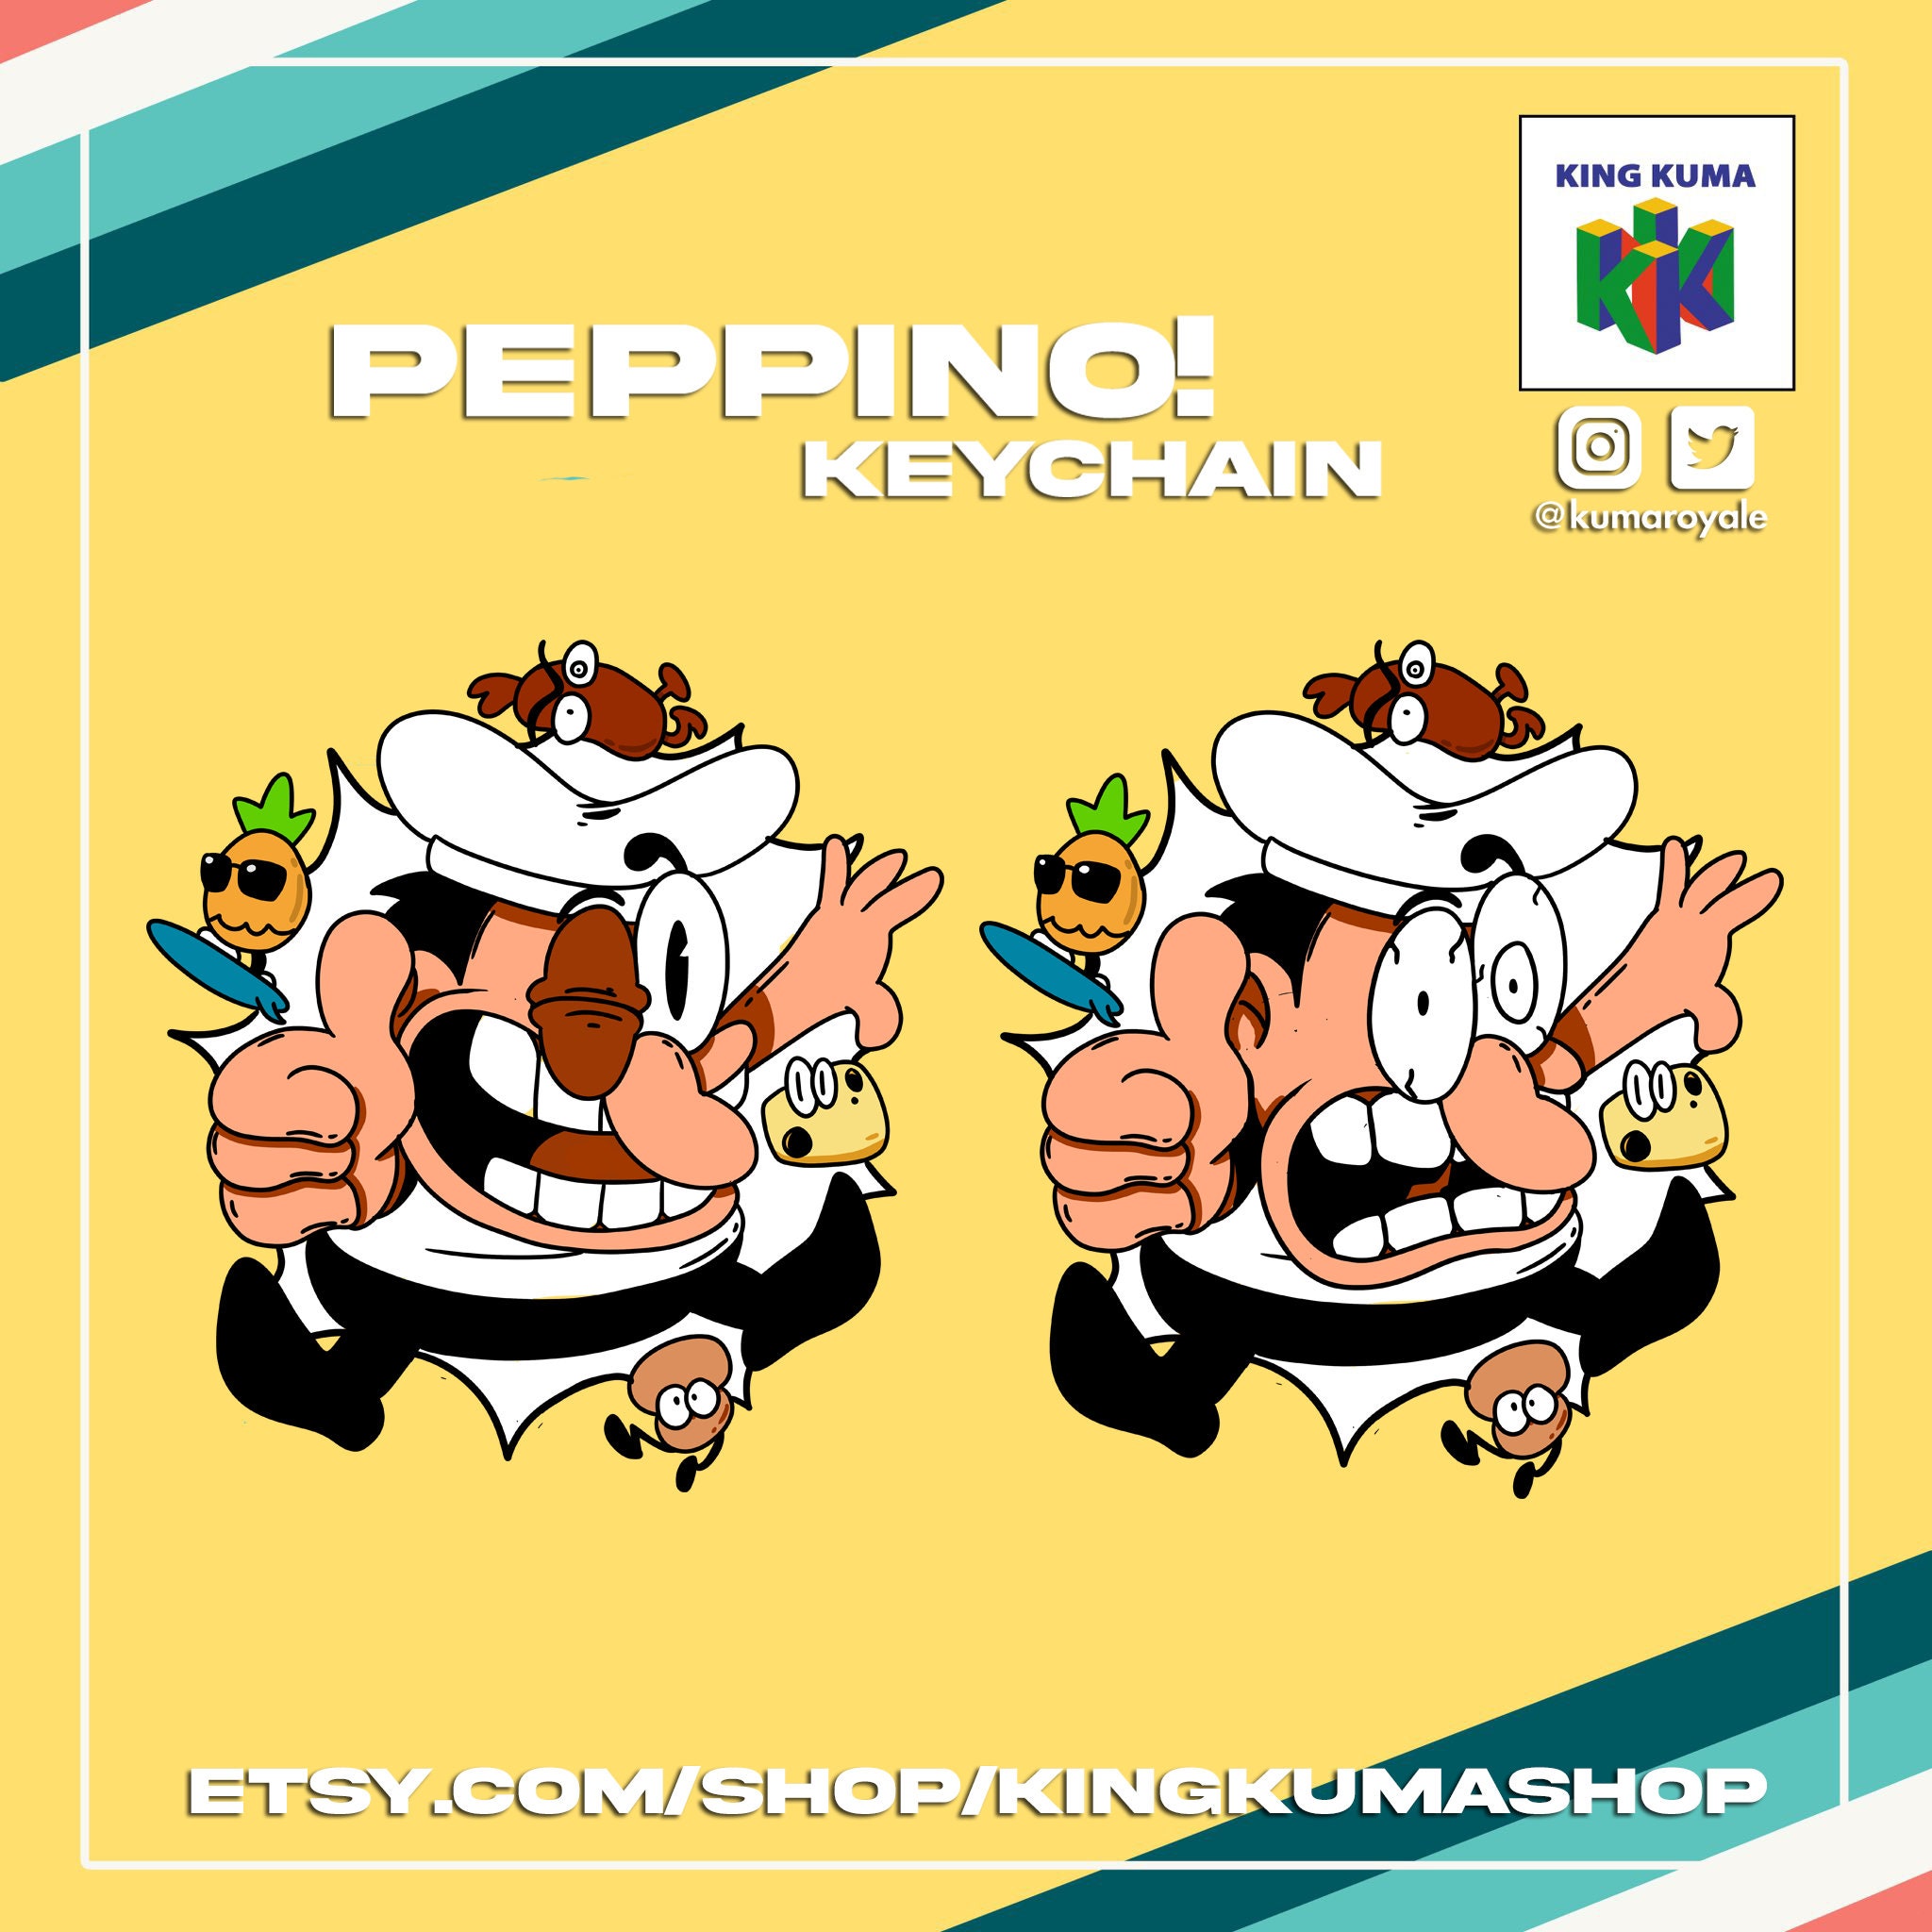 Super Peppino v2 - Pizza Tower - Posters and Art Prints